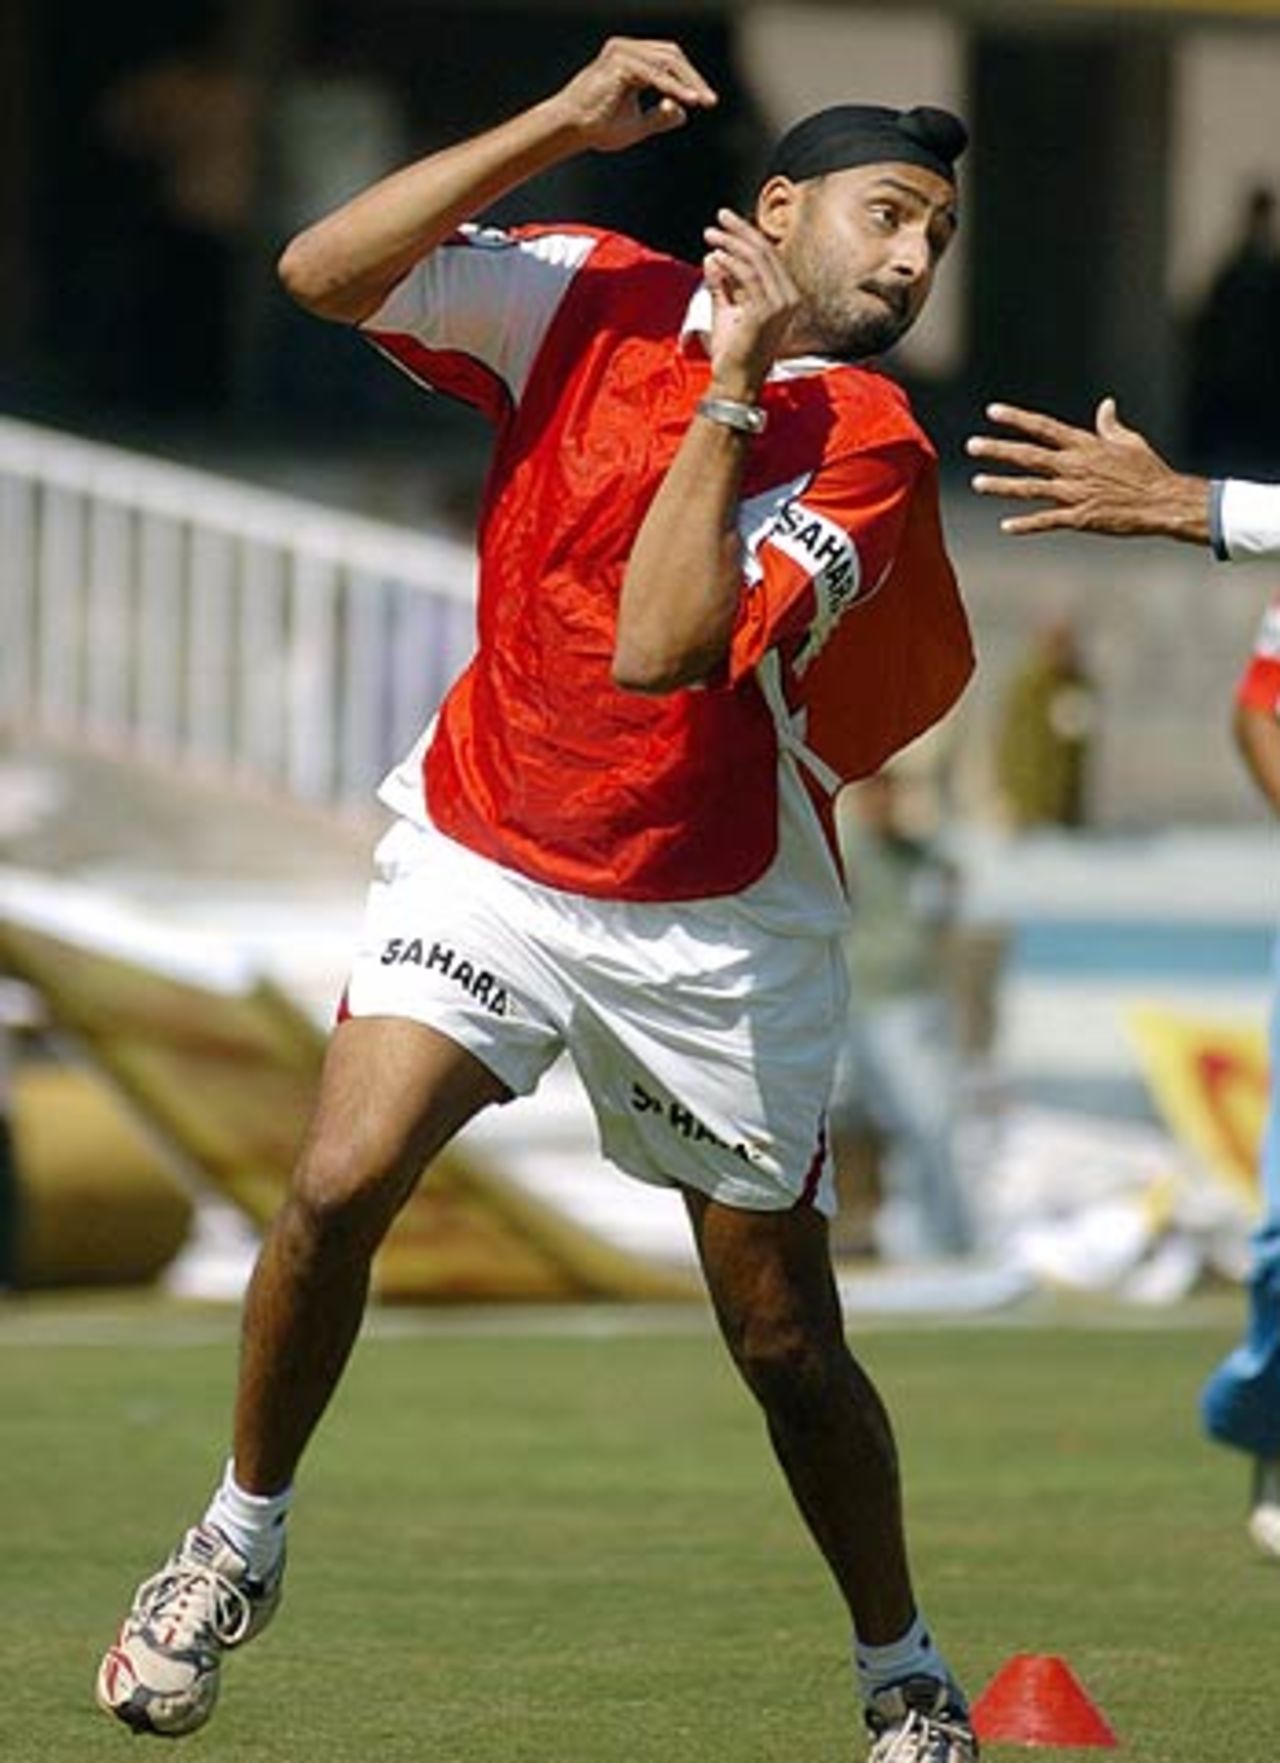 Harbhajan Singh mixes the <i>bhangra</i> with fielding drills during a practice session ahead of the 1st ODI against South Africa, Rajiv Gandhi International Stadium, Uppal, Hyderabad, November 15, 2005